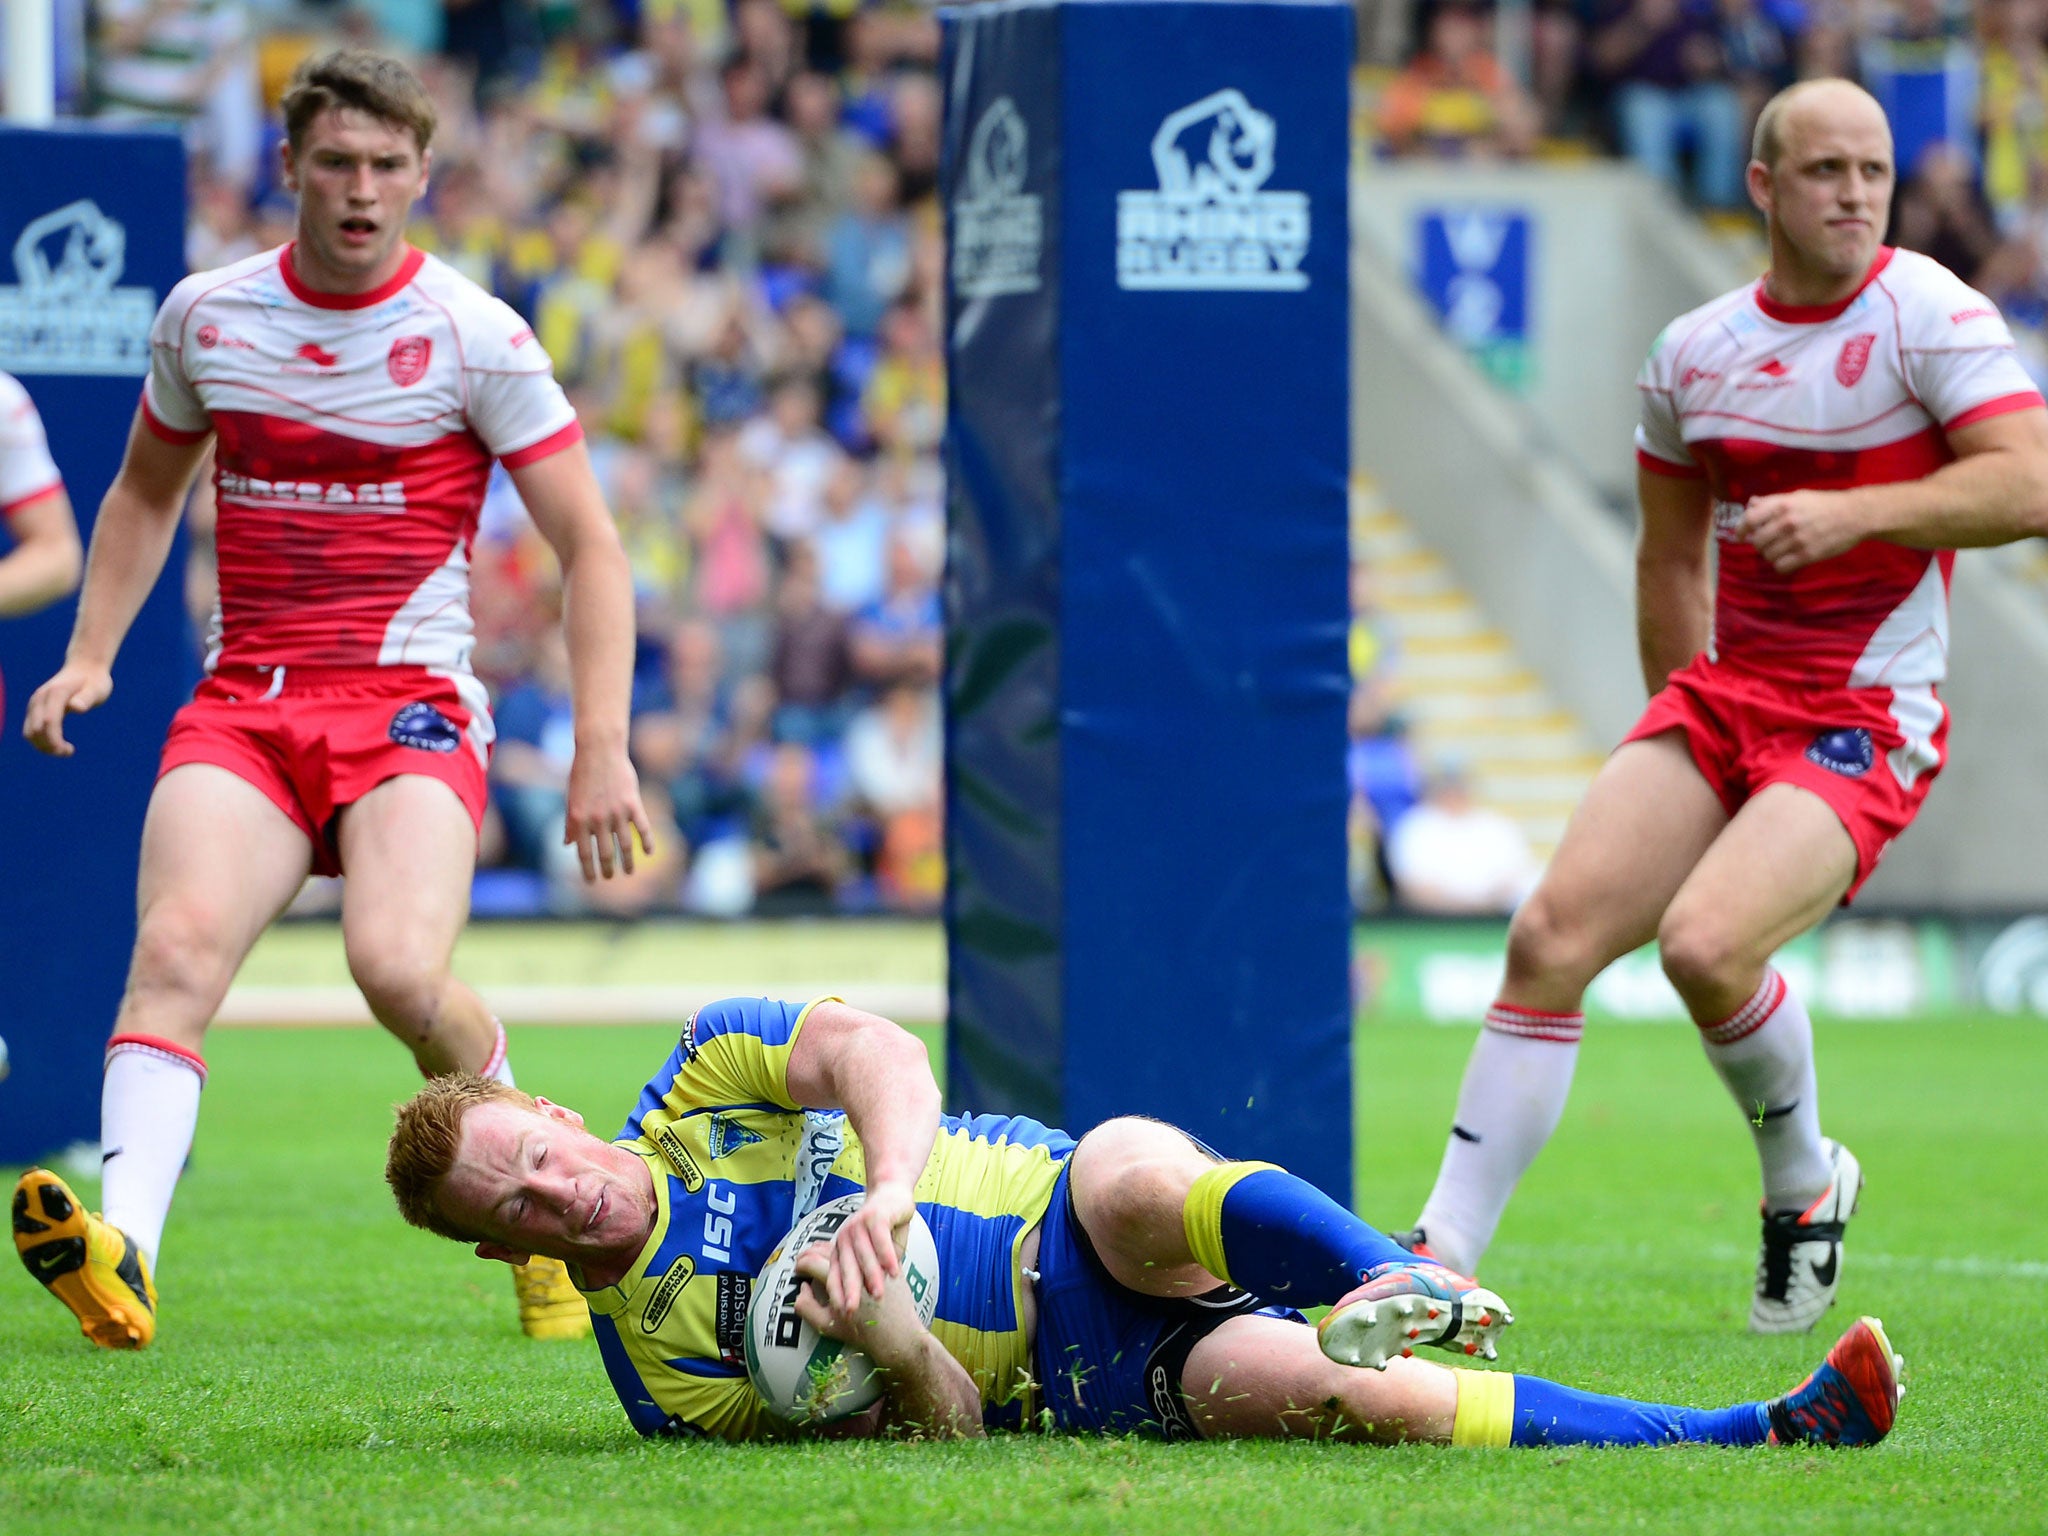 Warrington’s Chris Riley goes over for a try